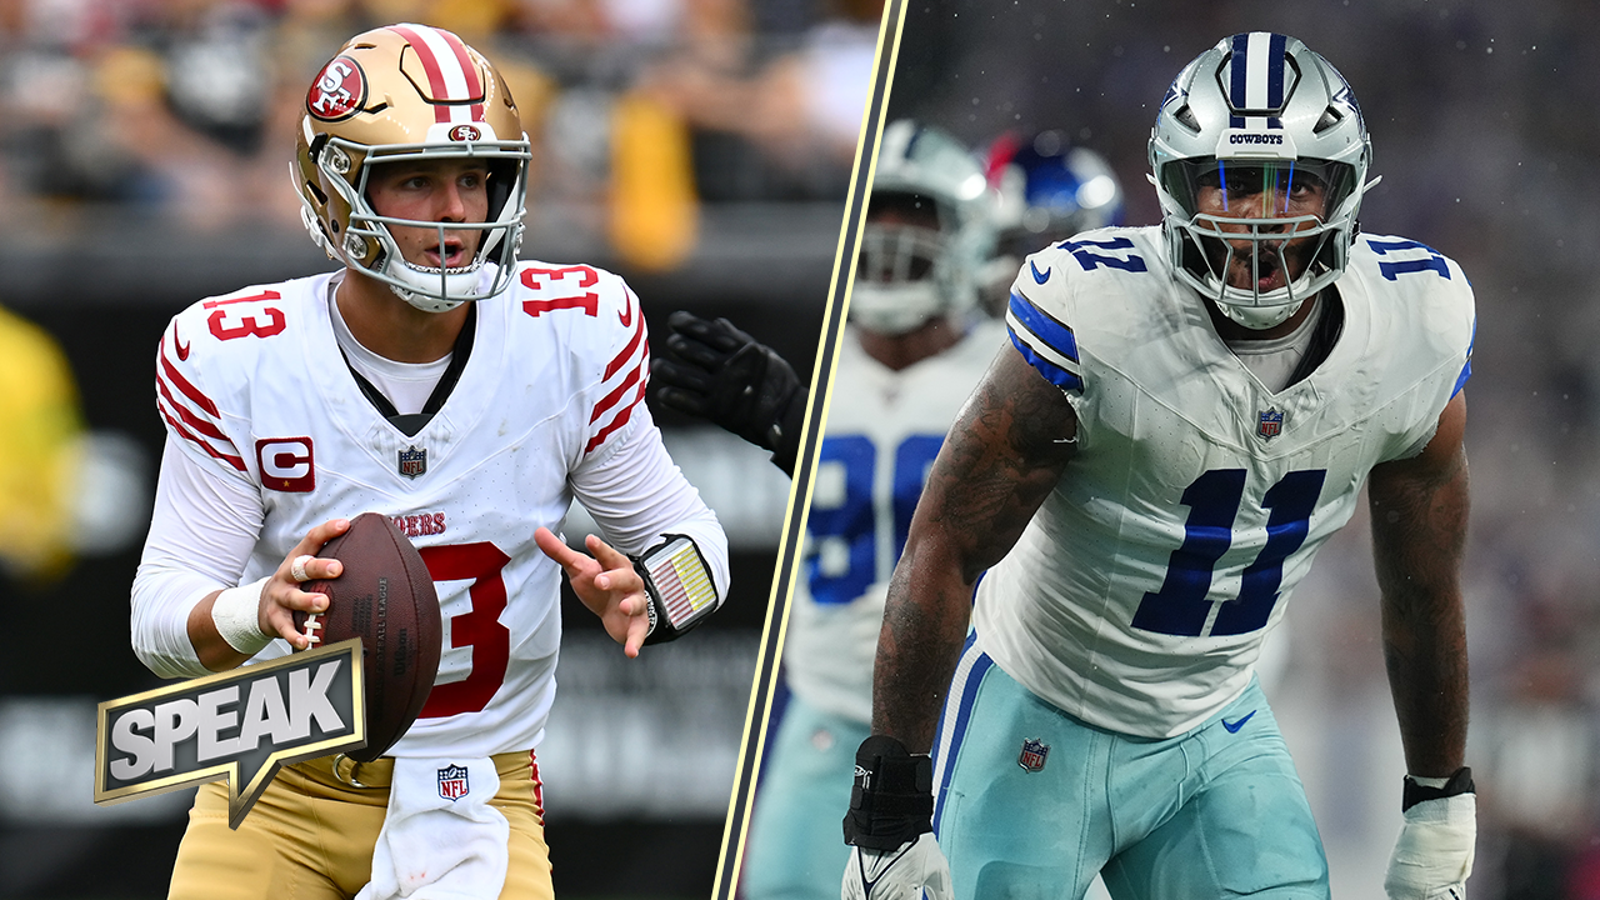 49ers or Cowboys: Who made a bigger statement?